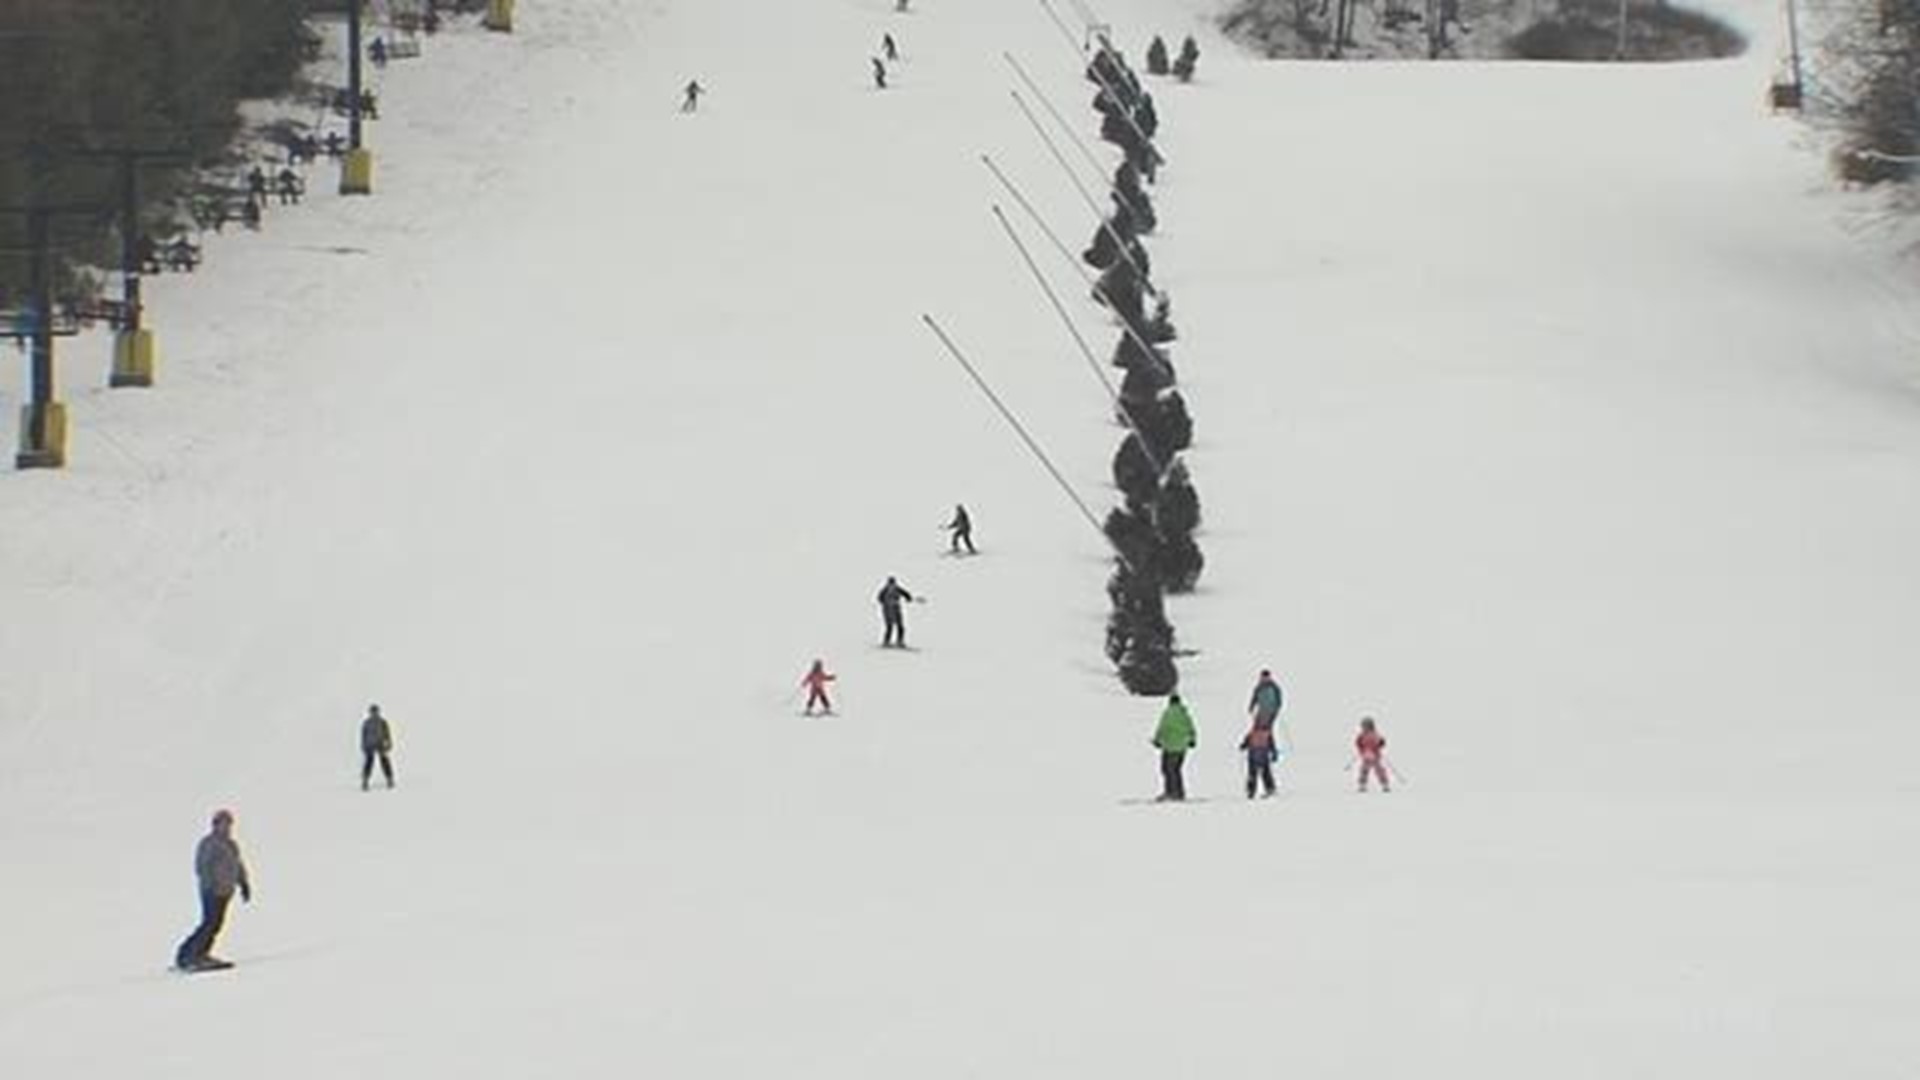 If there's one group of people who are welcoming the approaching winter storm on Jan. 19, it's skiers as they hit the slopes of Tussey Mountain Ski area in Boalsburg, Pennsylvania.